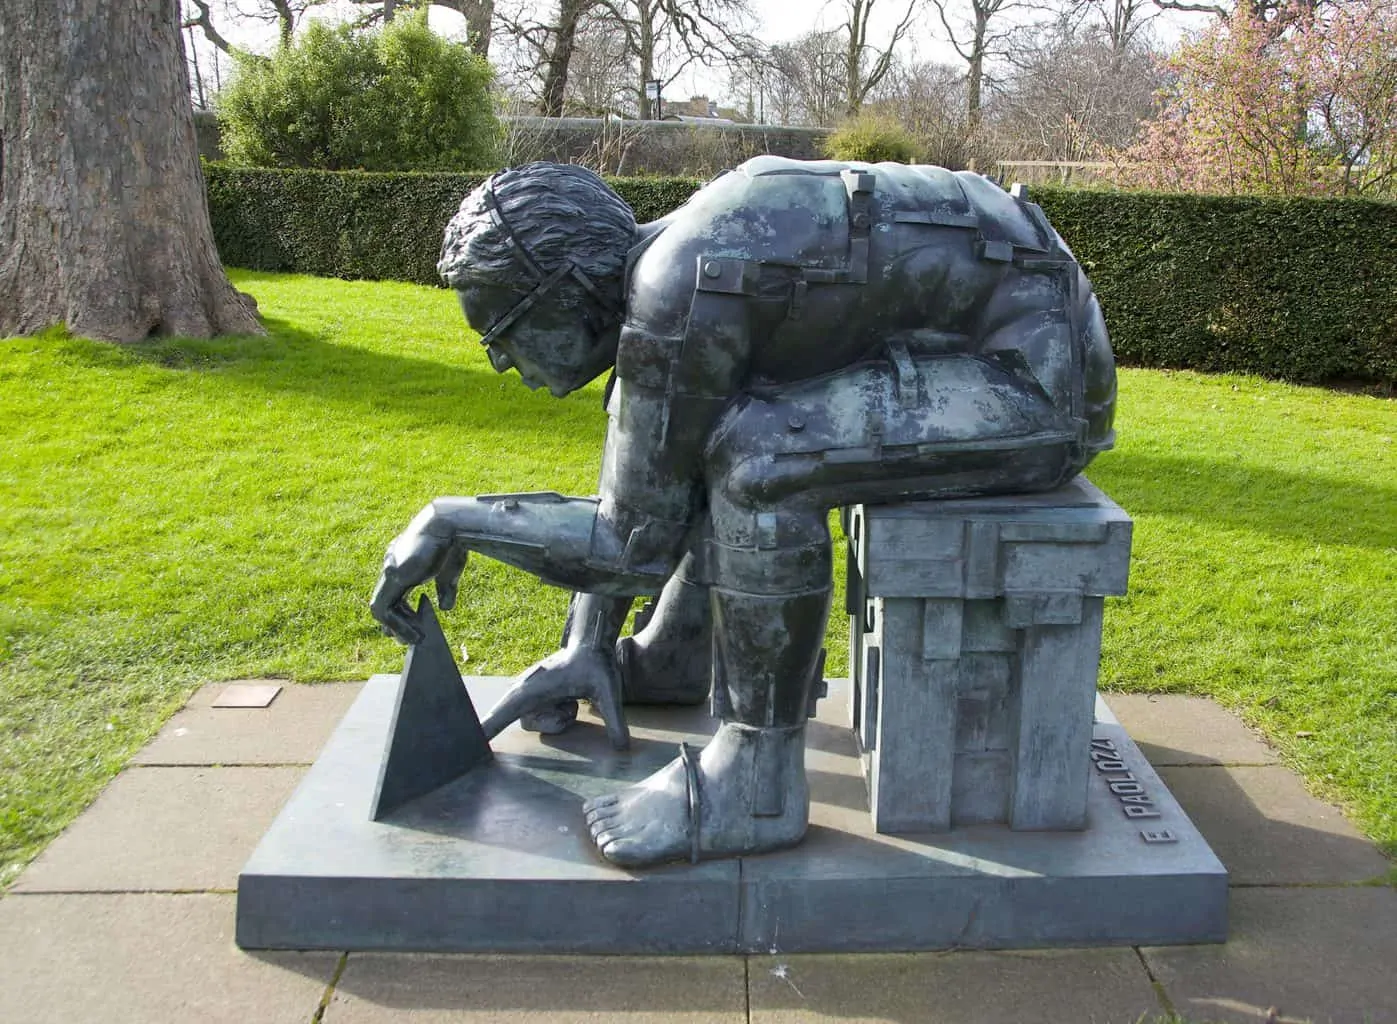 A sculpture by Eduardo Paolozzi on the grounds of the Scottish National Gallery of Modern Art in Edinburgh.